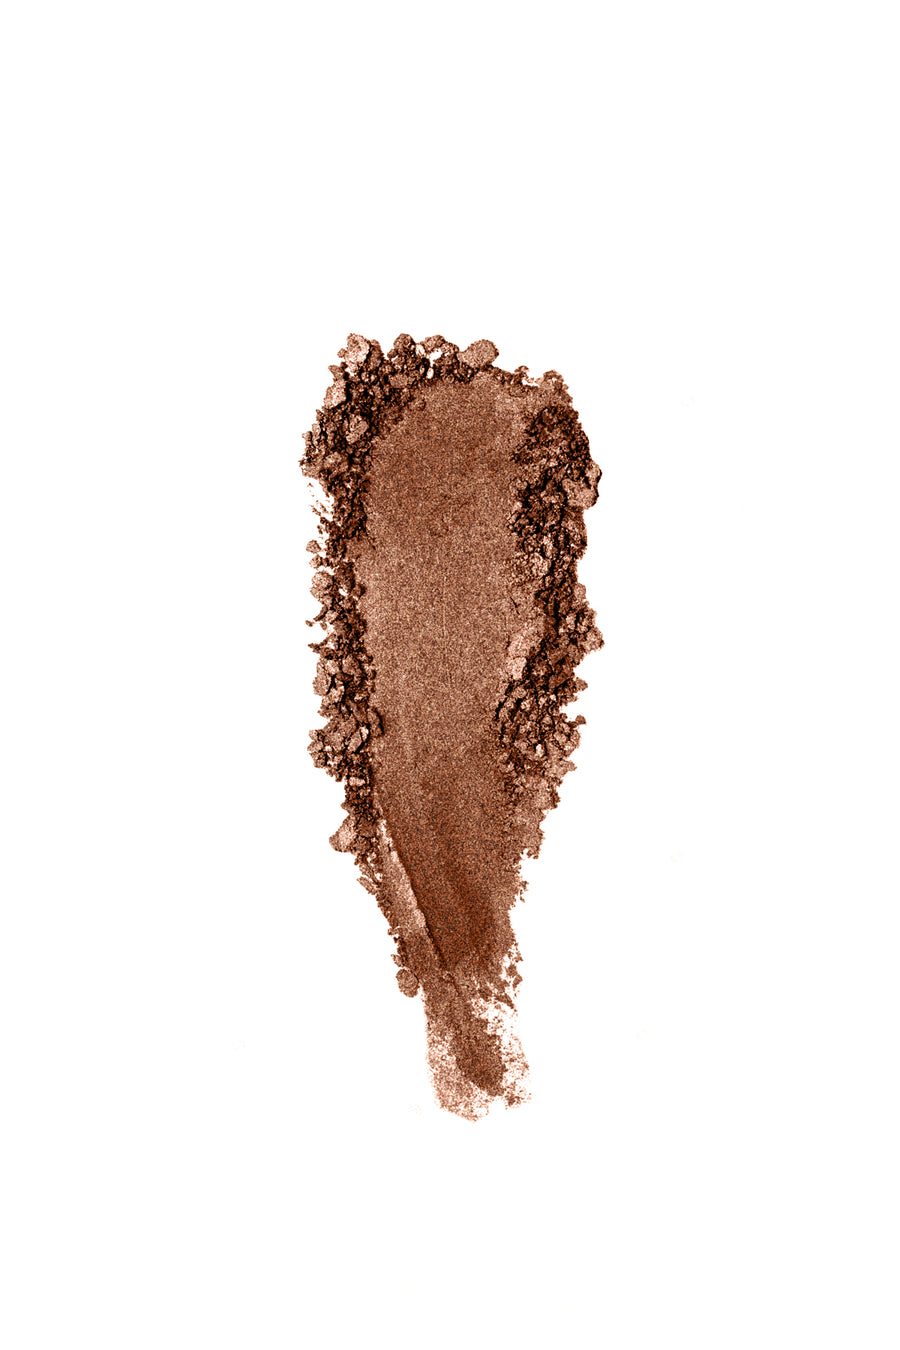 Shimmer Eyeshadow #51 - Copper Brown - Blend Mineral Cosmetics